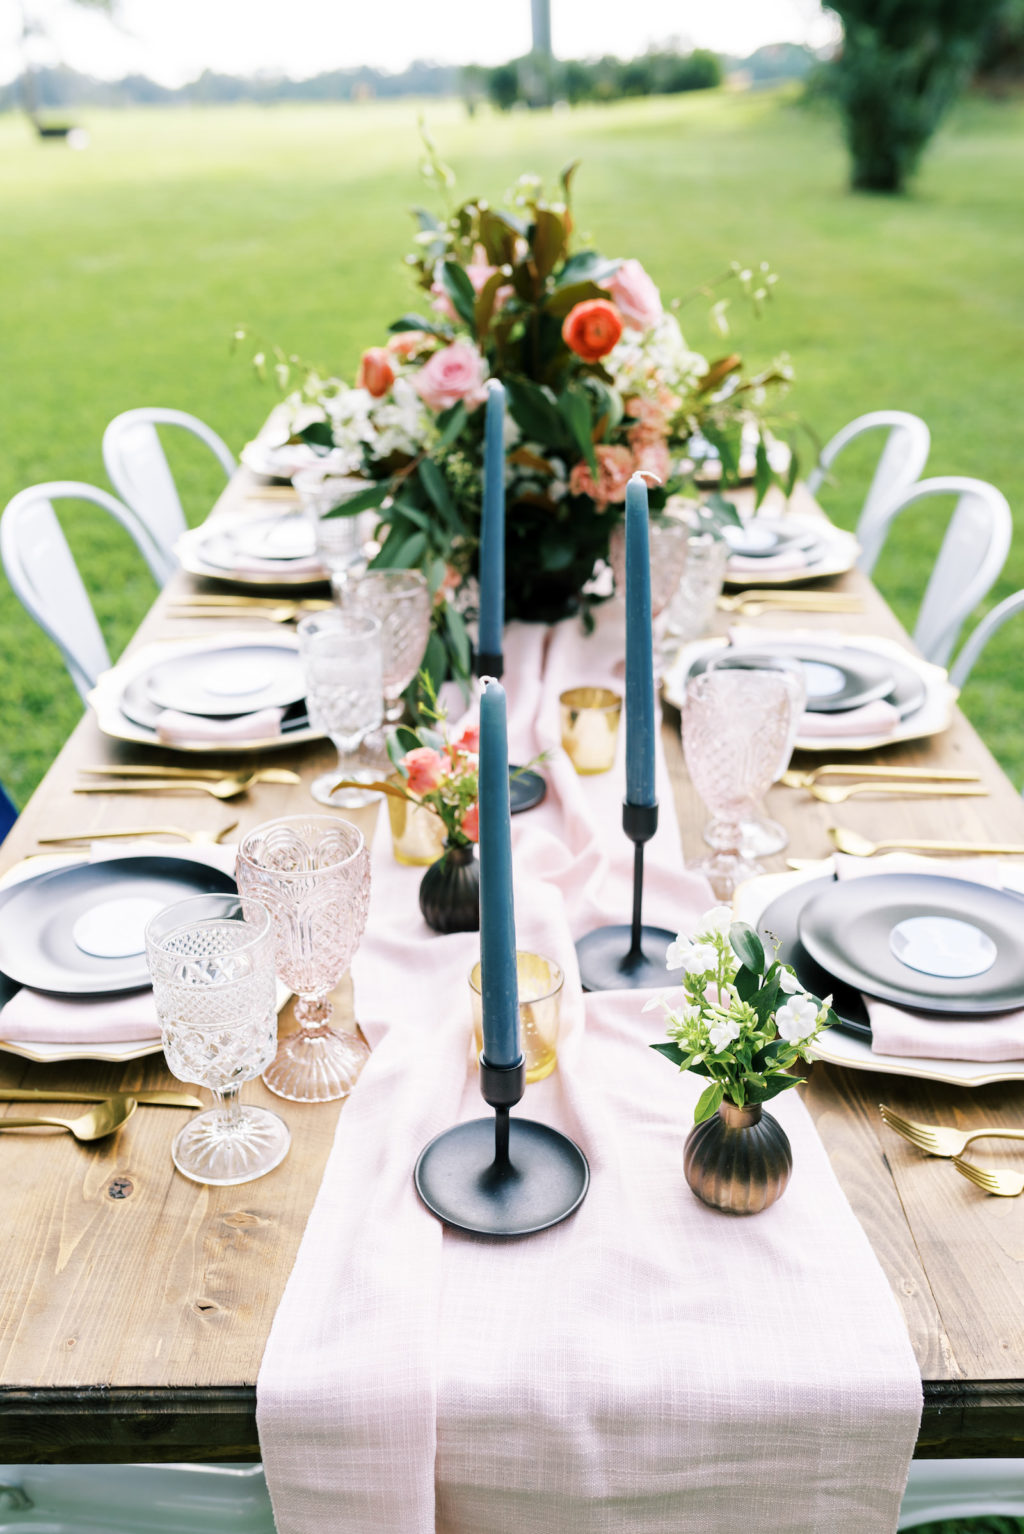 Southern Elegant Inspired Florida Outdoor Wedding Reception, Long Wooden Feasting Table with Dark Blue Place Setting, Gold Flatware, Pink Burlap Linens, Tall Blue Candelabras, Low Floral Centerpiece with Pink Roses, Orange Florals, and Magnolia Leaf Greenery | Tampa Bay Wedding Planner EventFull Weddings | Florida Wedding Linen Rentals Over The Top Linen Rentals